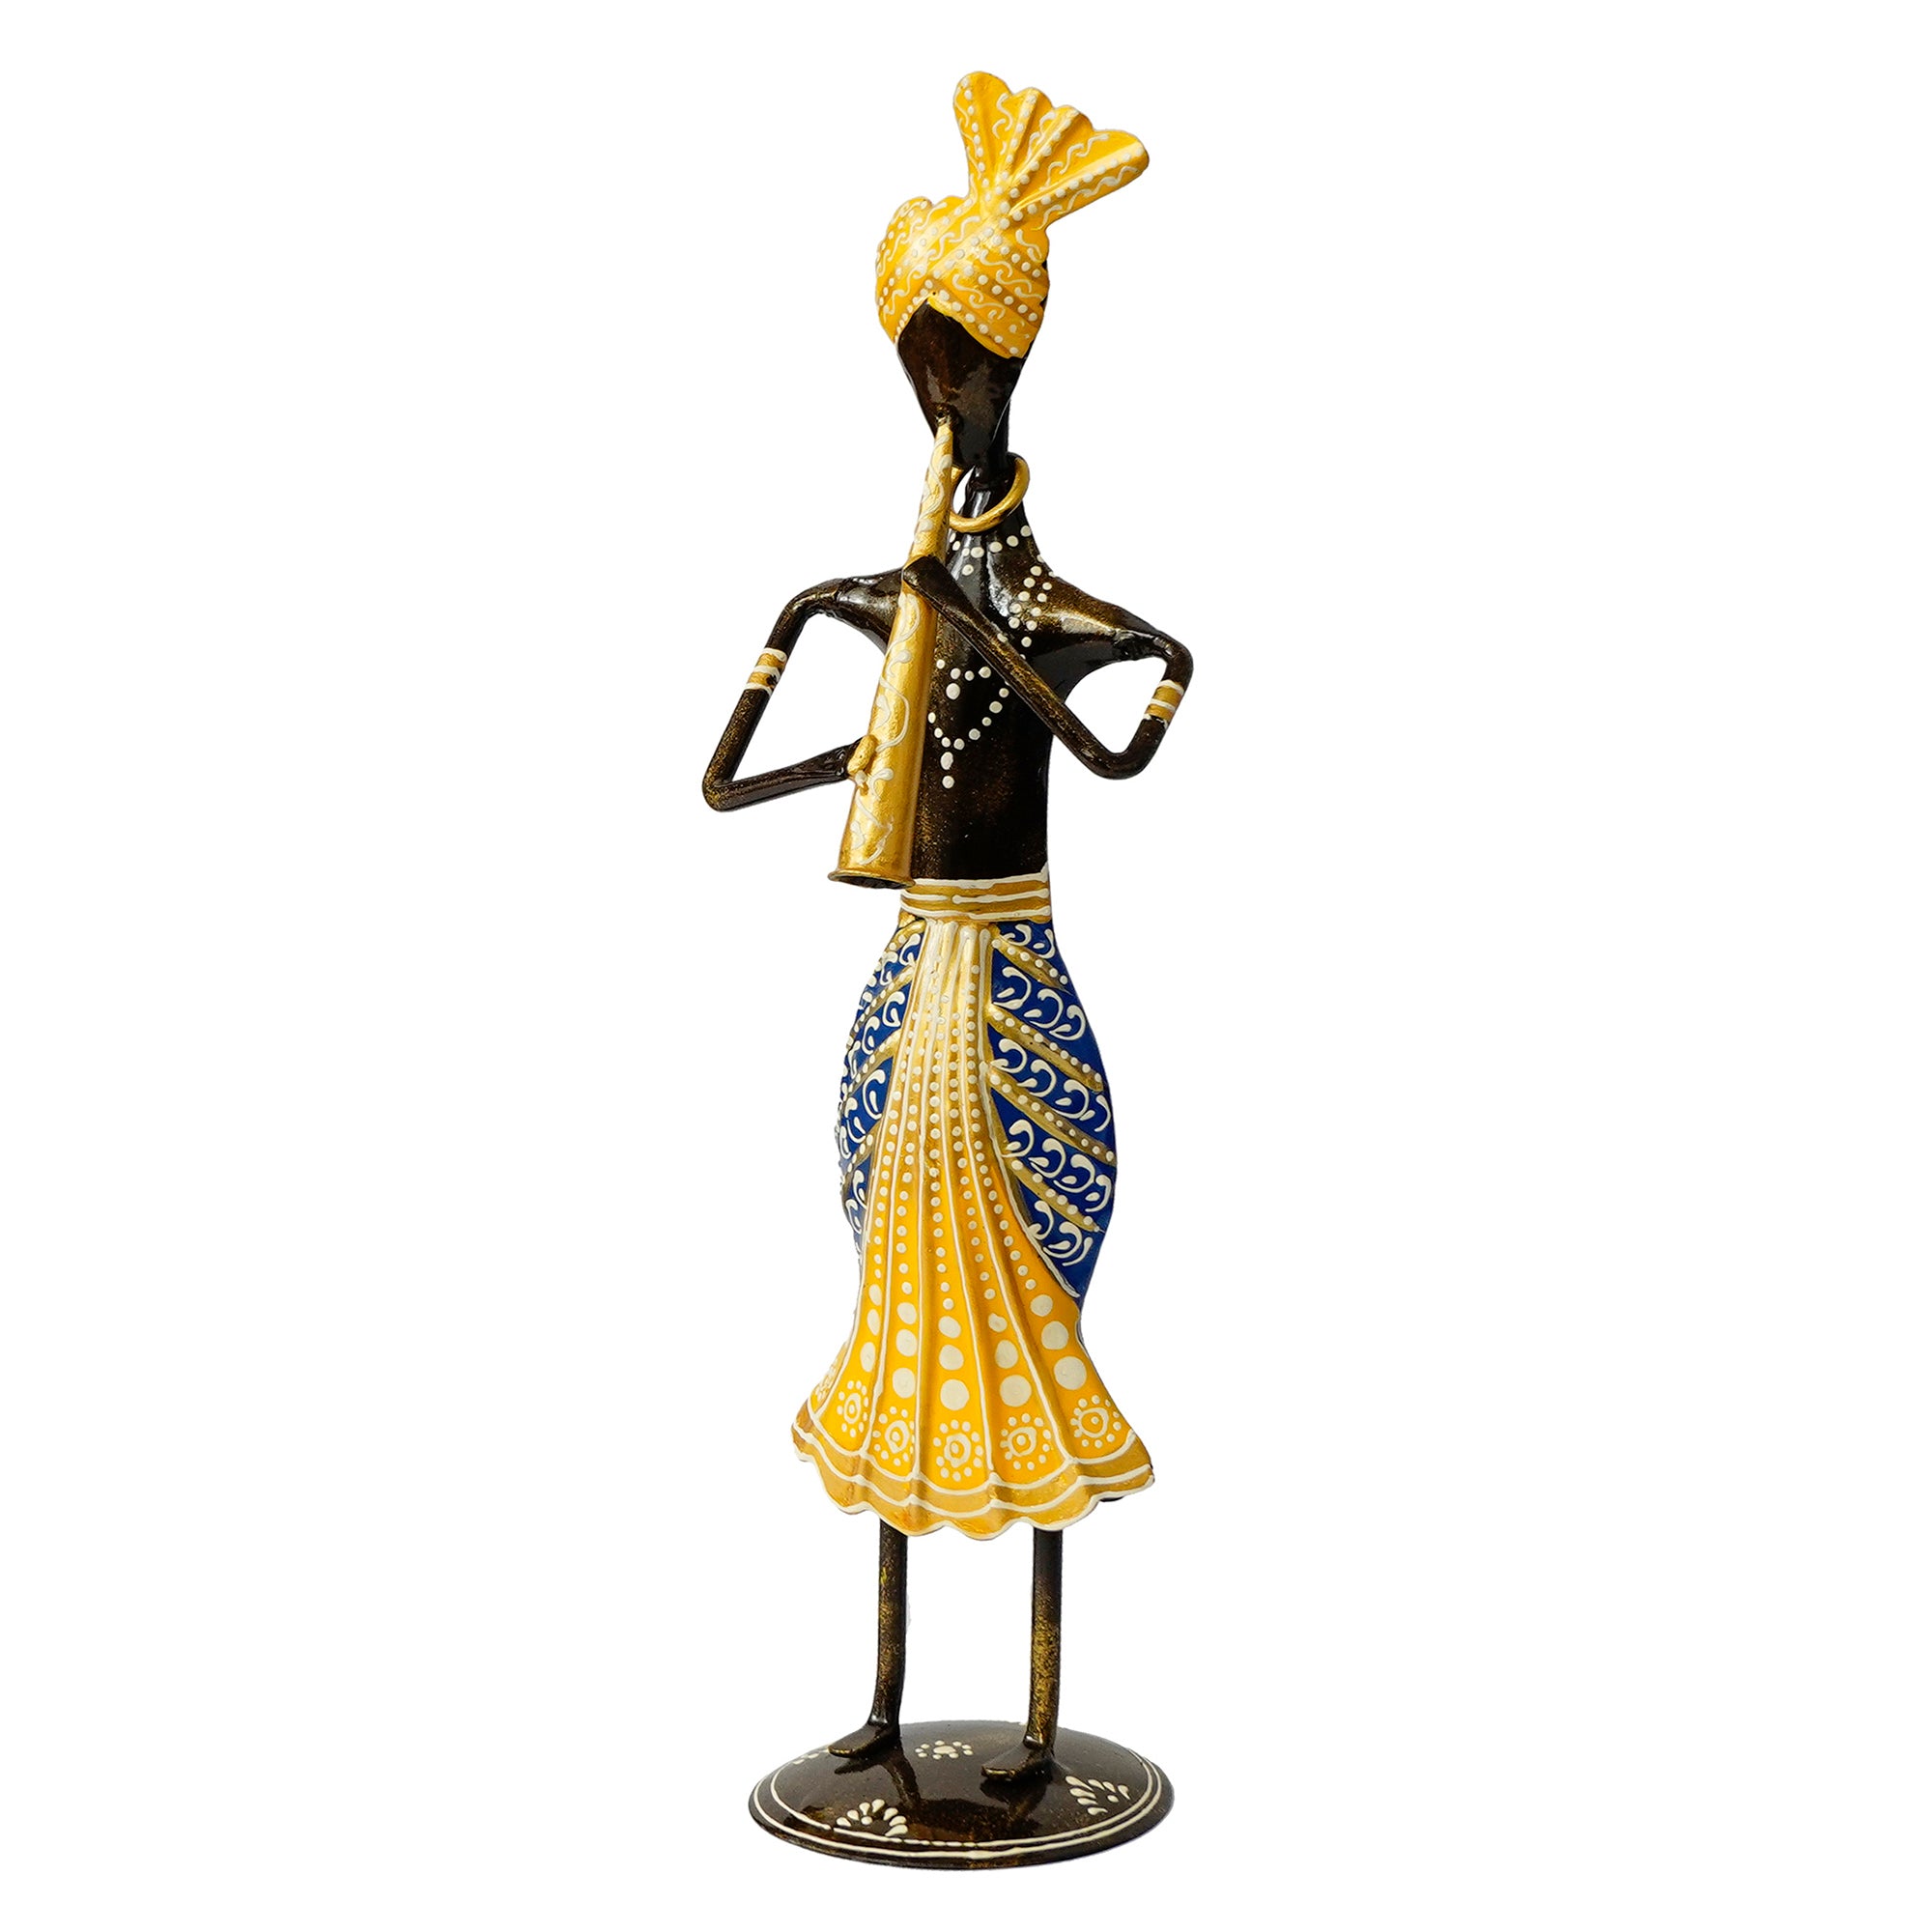 Iron Tribal Man Figurine Playing Trumpet Musical Instrument Decorative Showpiece (Black, Yellow and Blue) 4